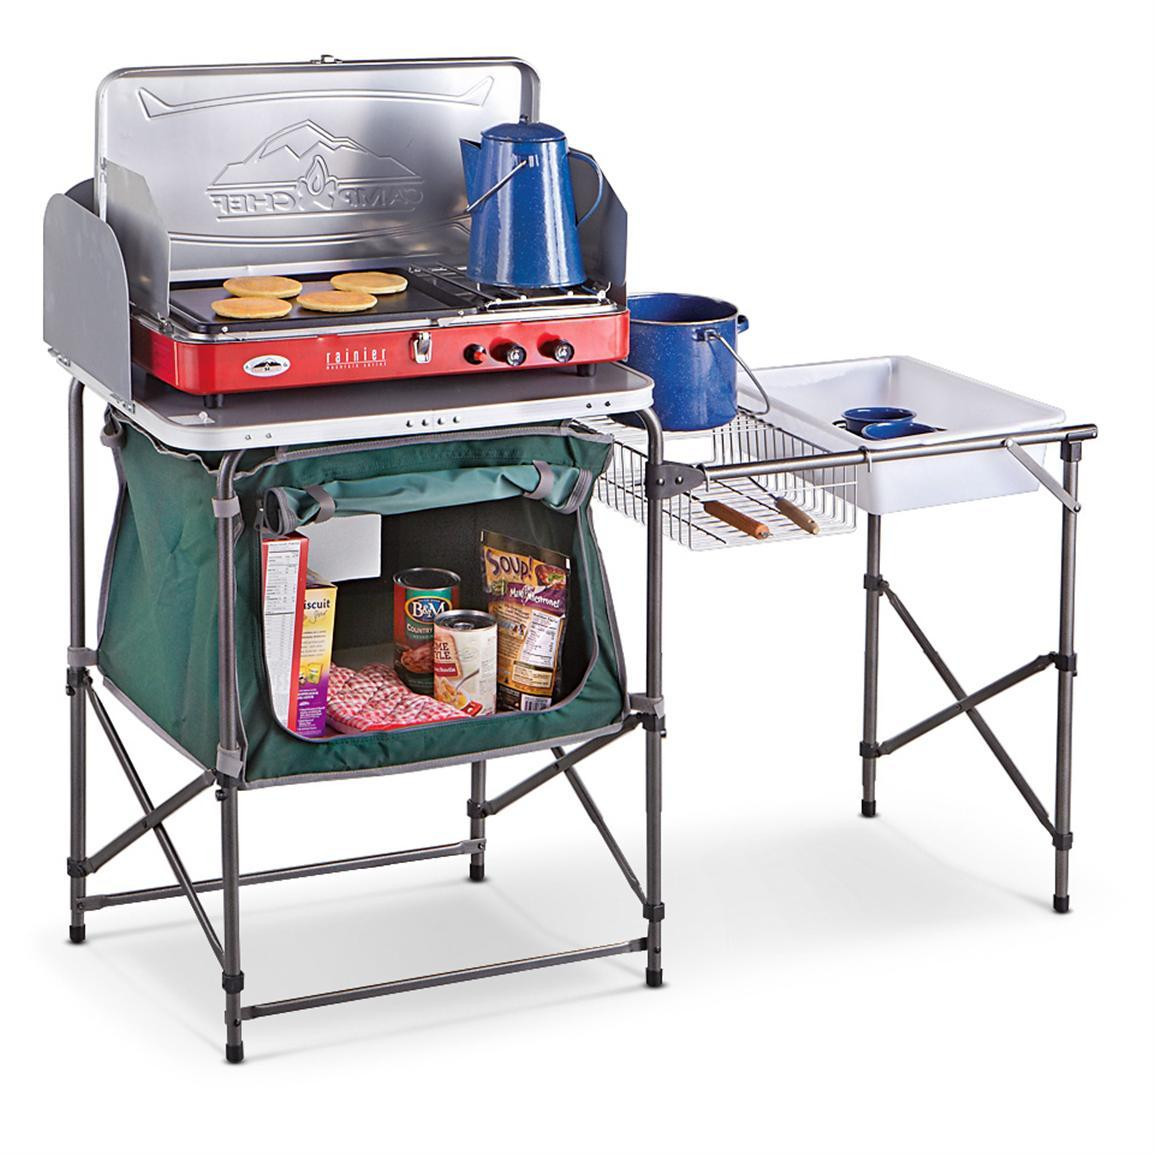 Outdoor Camp Kitchen
 Guide Gear Deluxe Camp Kitchen Review